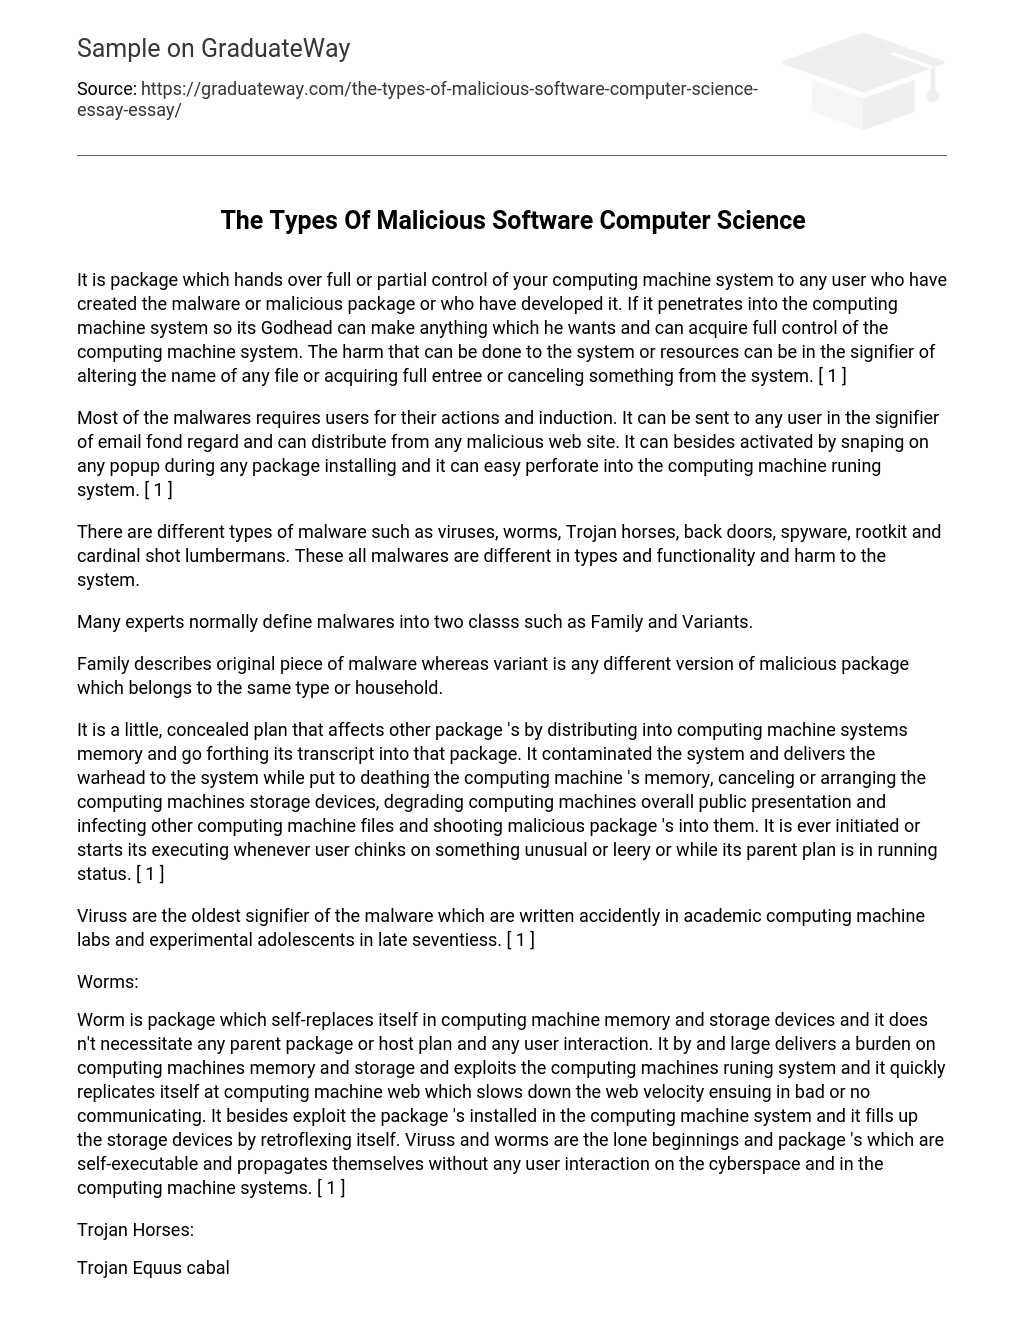 The Types Of Malicious Software Computer Science